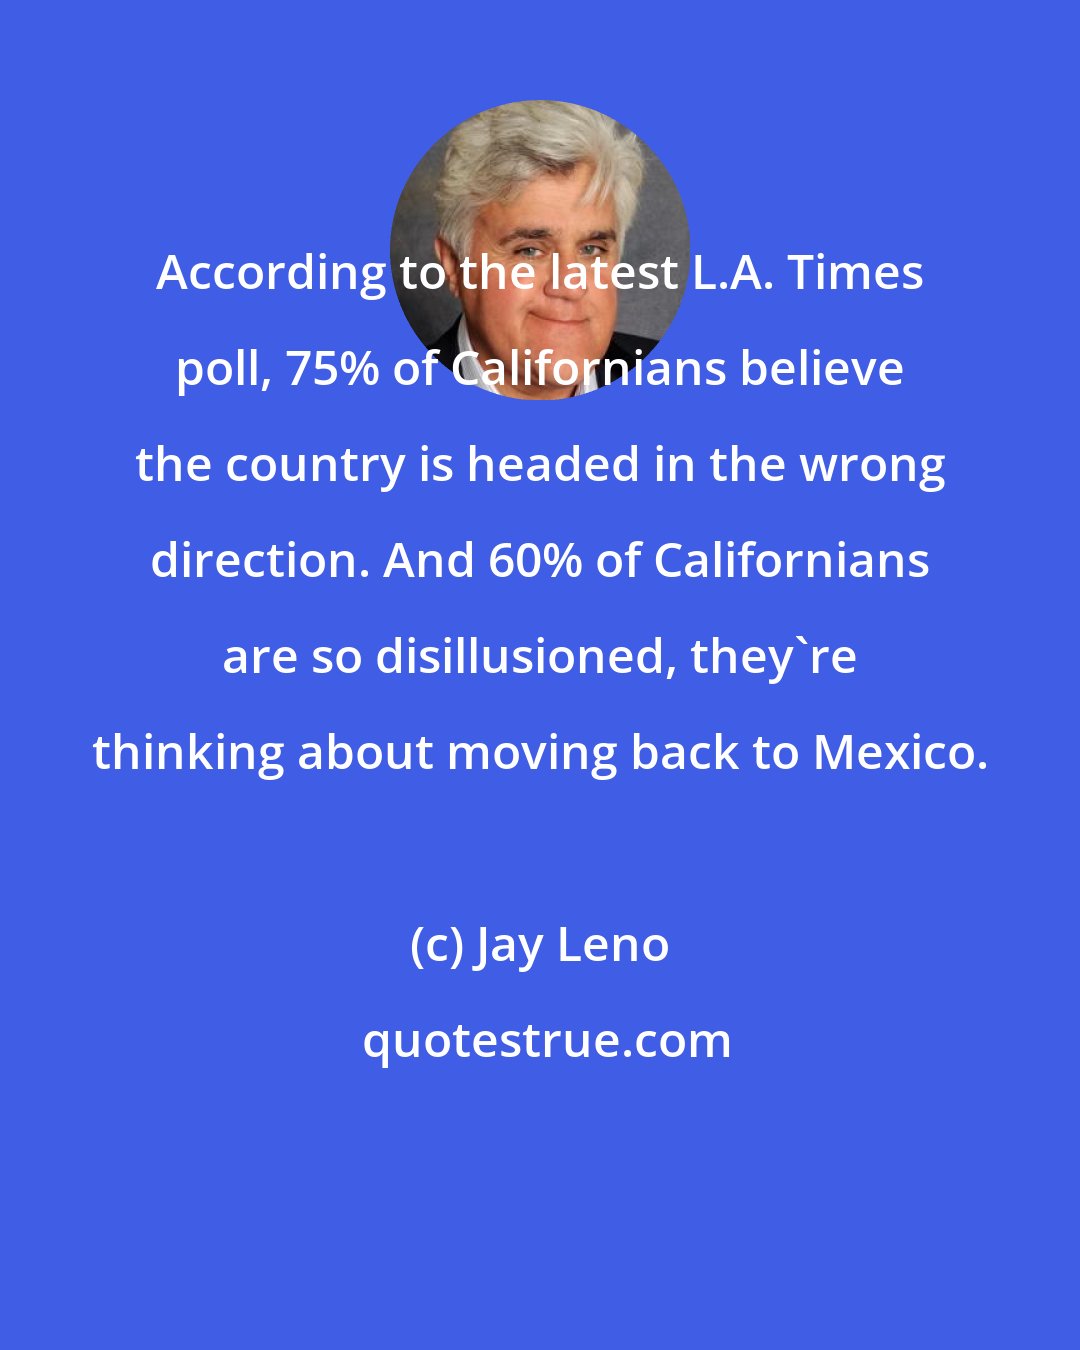 Jay Leno: According to the latest L.A. Times poll, 75% of Californians believe the country is headed in the wrong direction. And 60% of Californians are so disillusioned, they're thinking about moving back to Mexico.